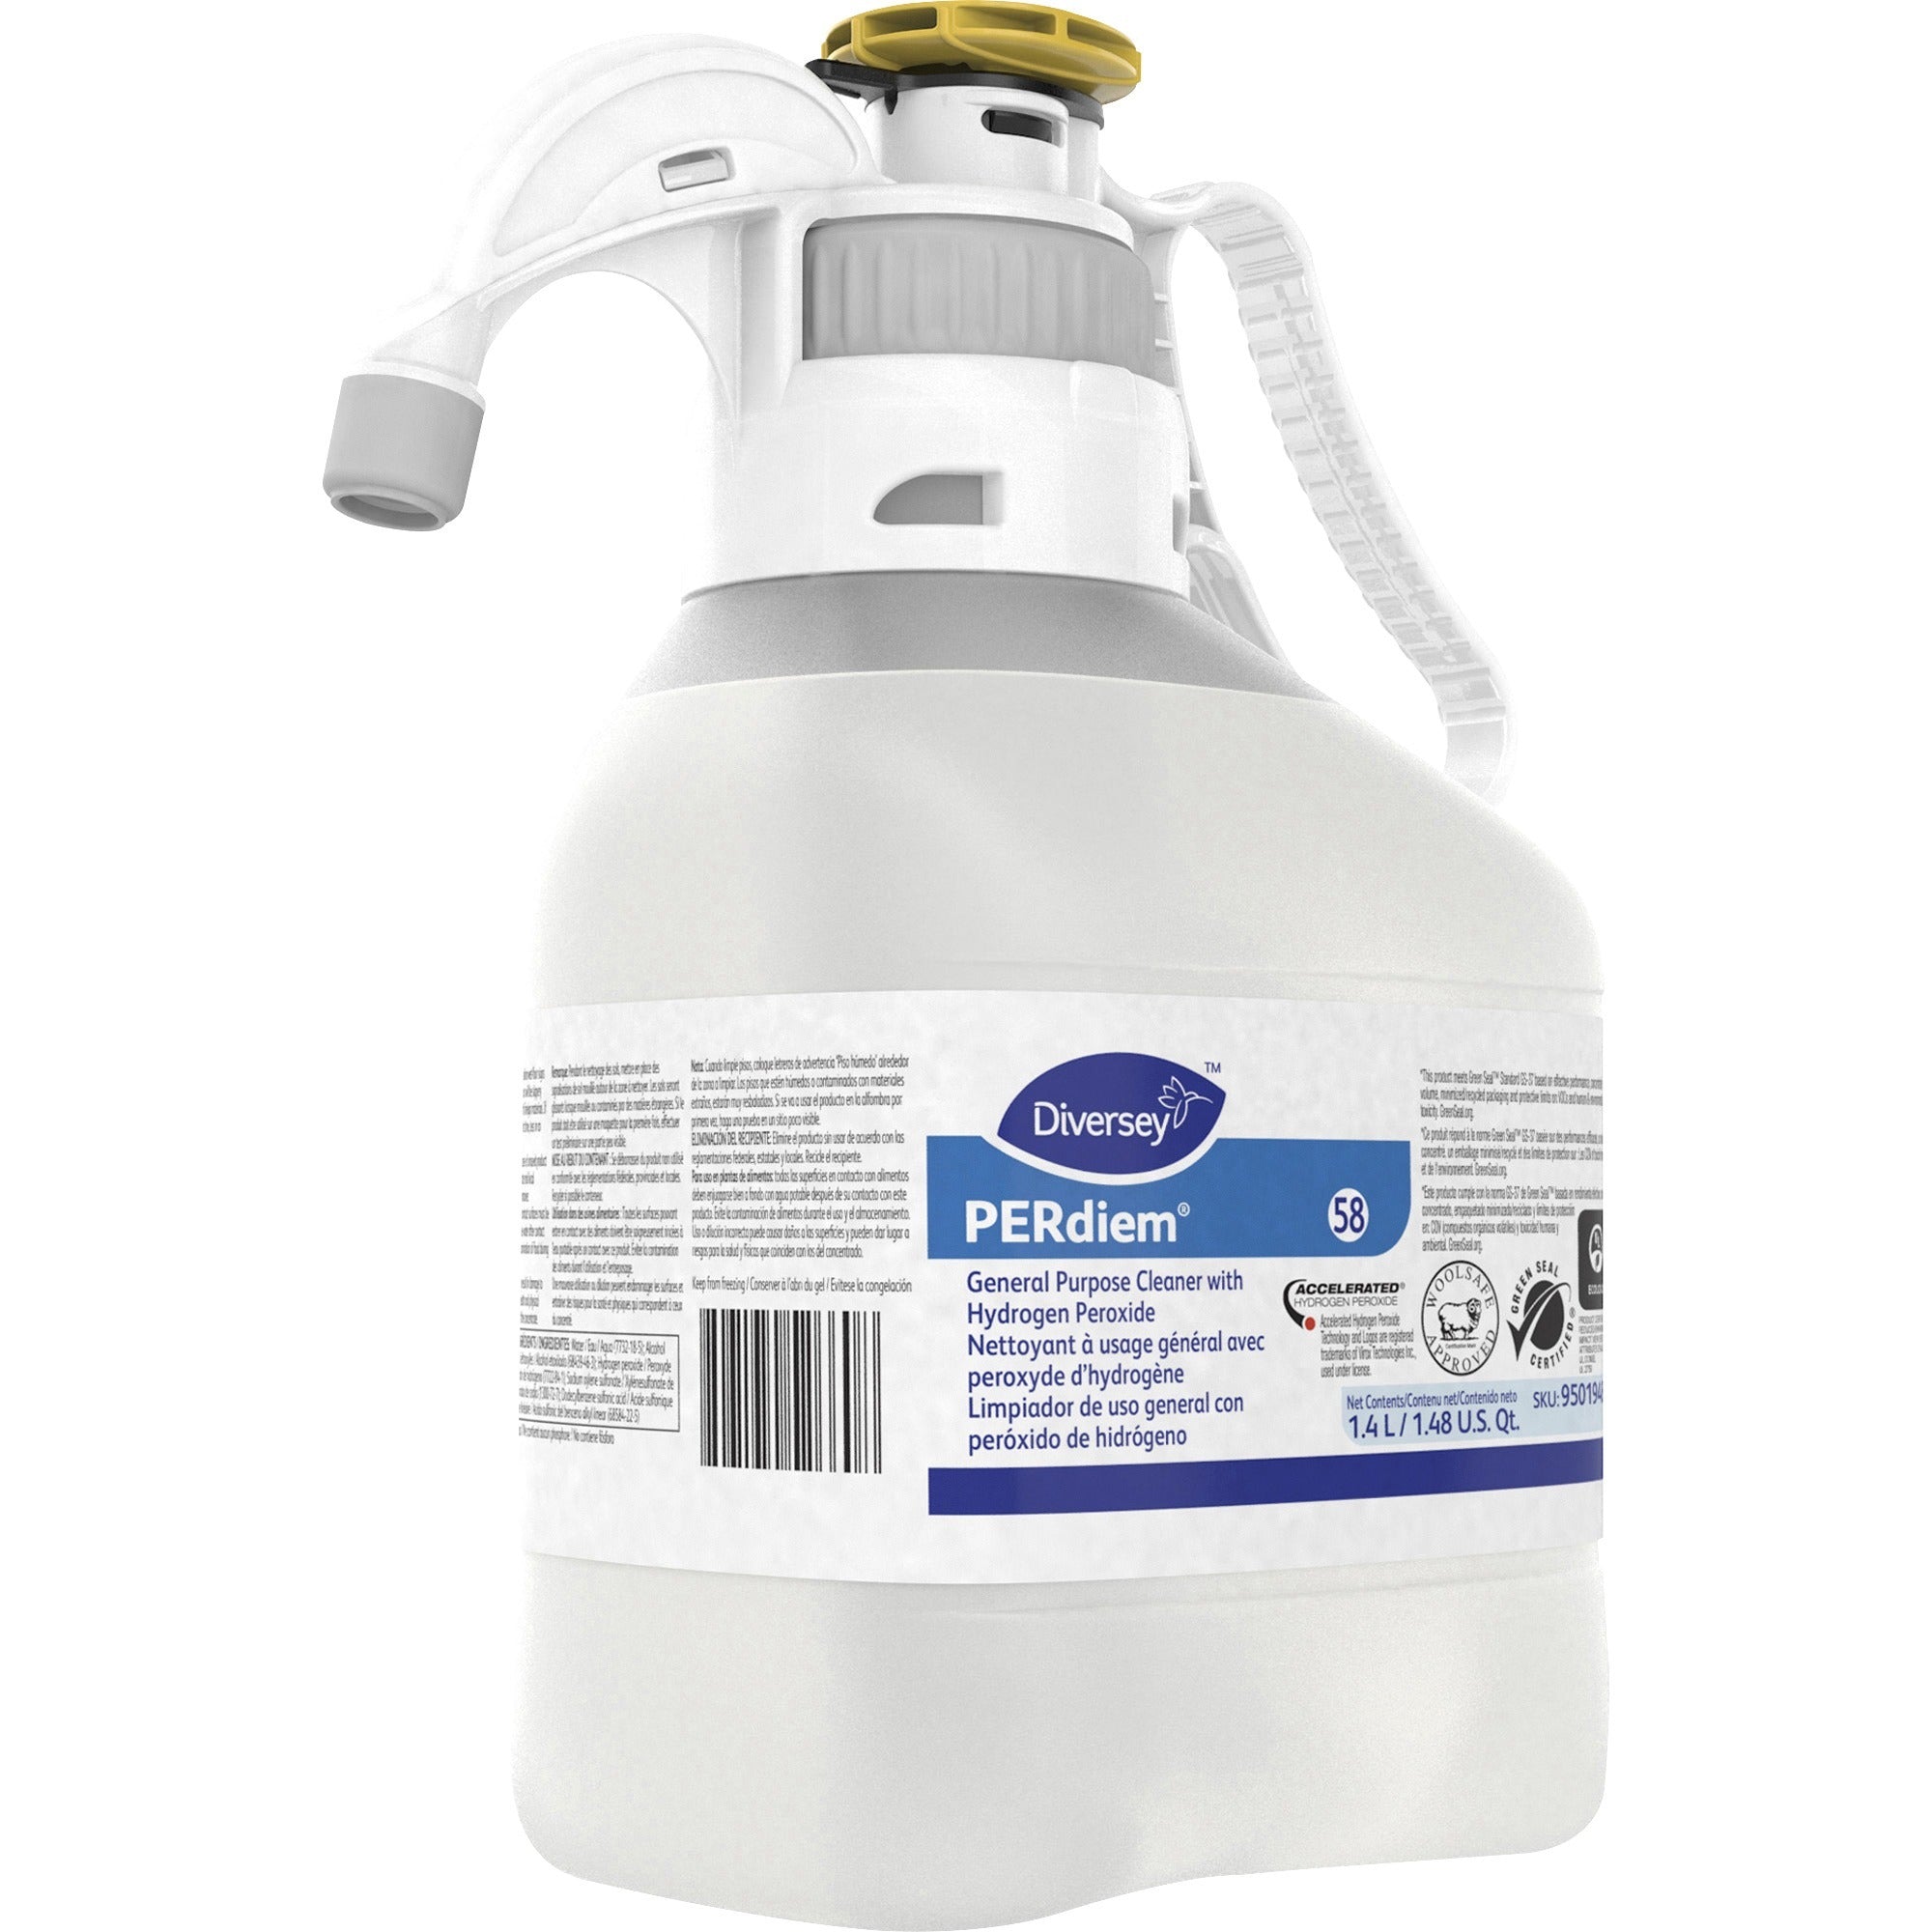 diversey-perdiem-general-purpose-cleaner-concentrate-473-fl-oz-15-quartbottle-2-carton-dye-free-odorless-fragrance-free-rinse-free-recyclable-environmentally-friendly-clear_dvo95019481ct - 3